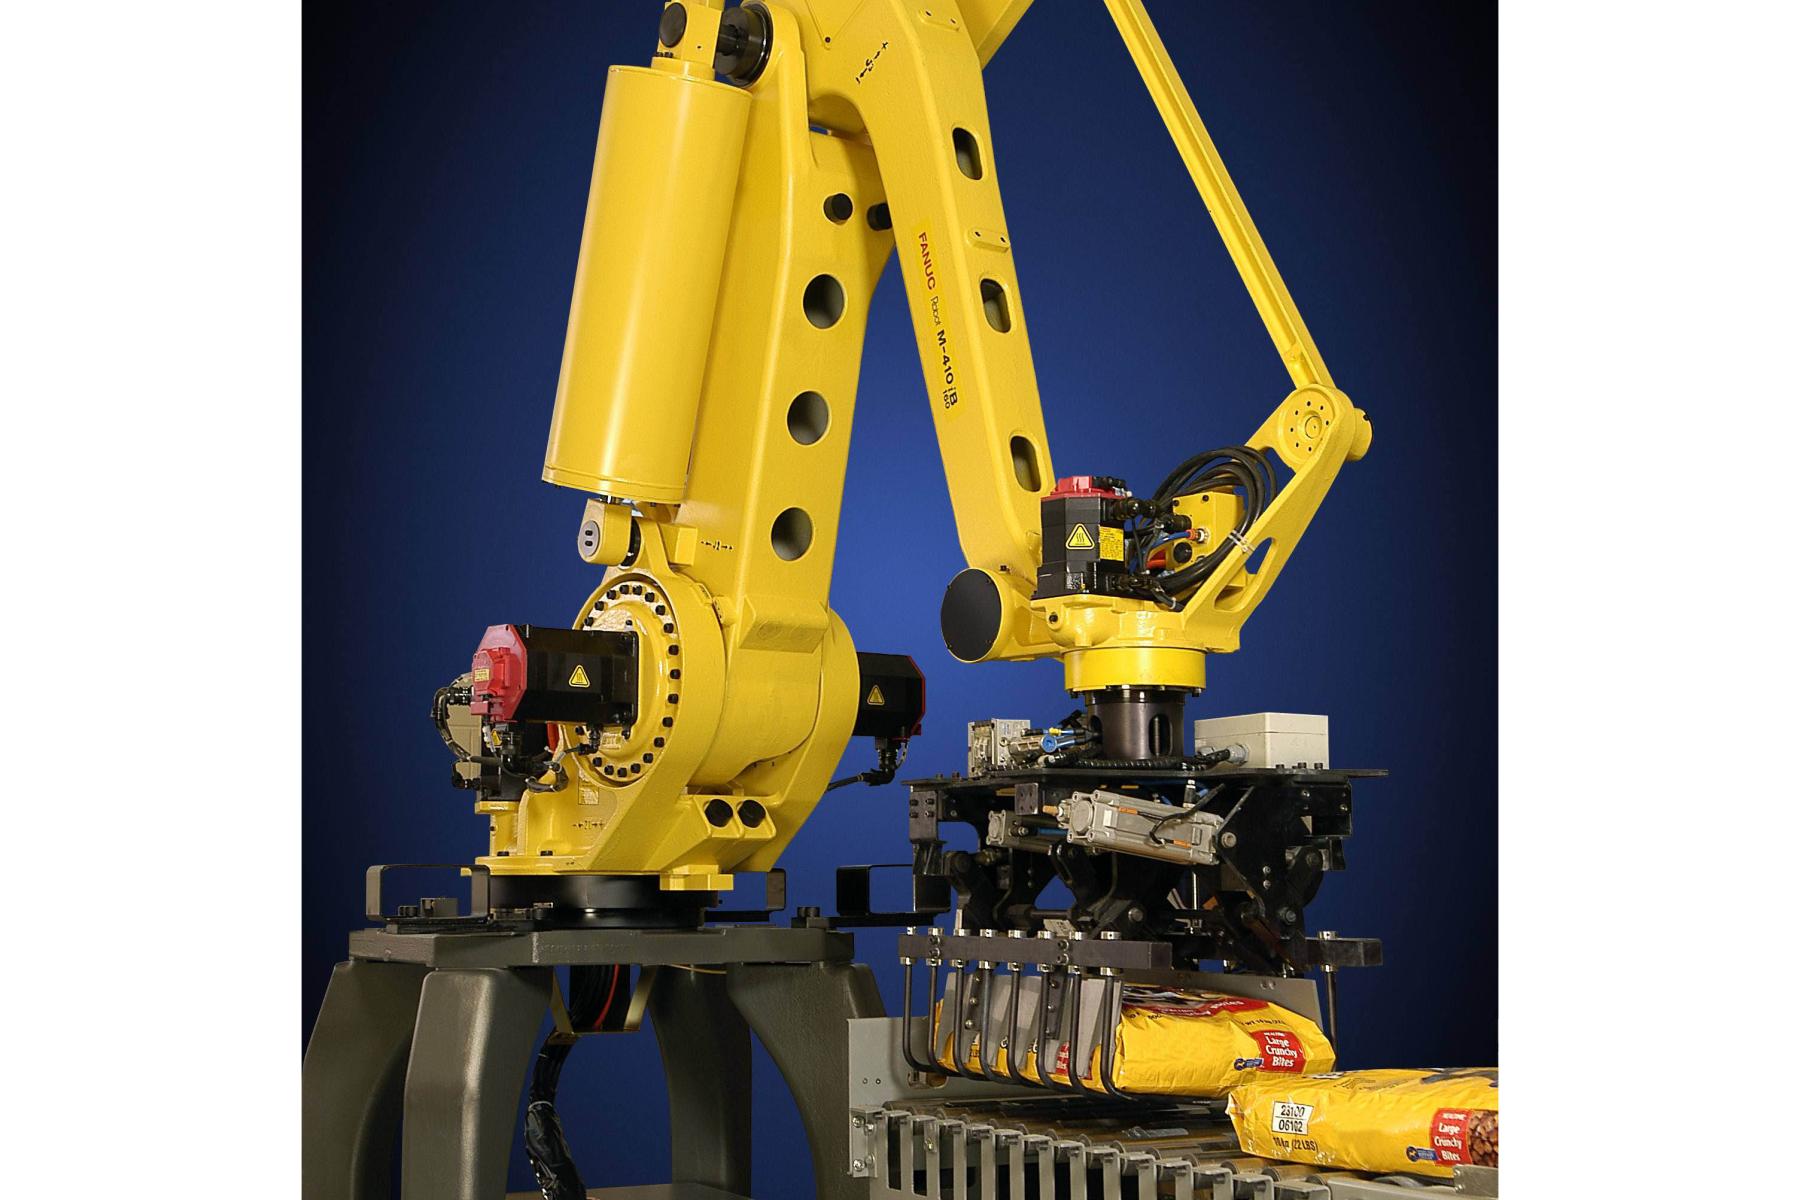 Image of a yellow Industrial robot